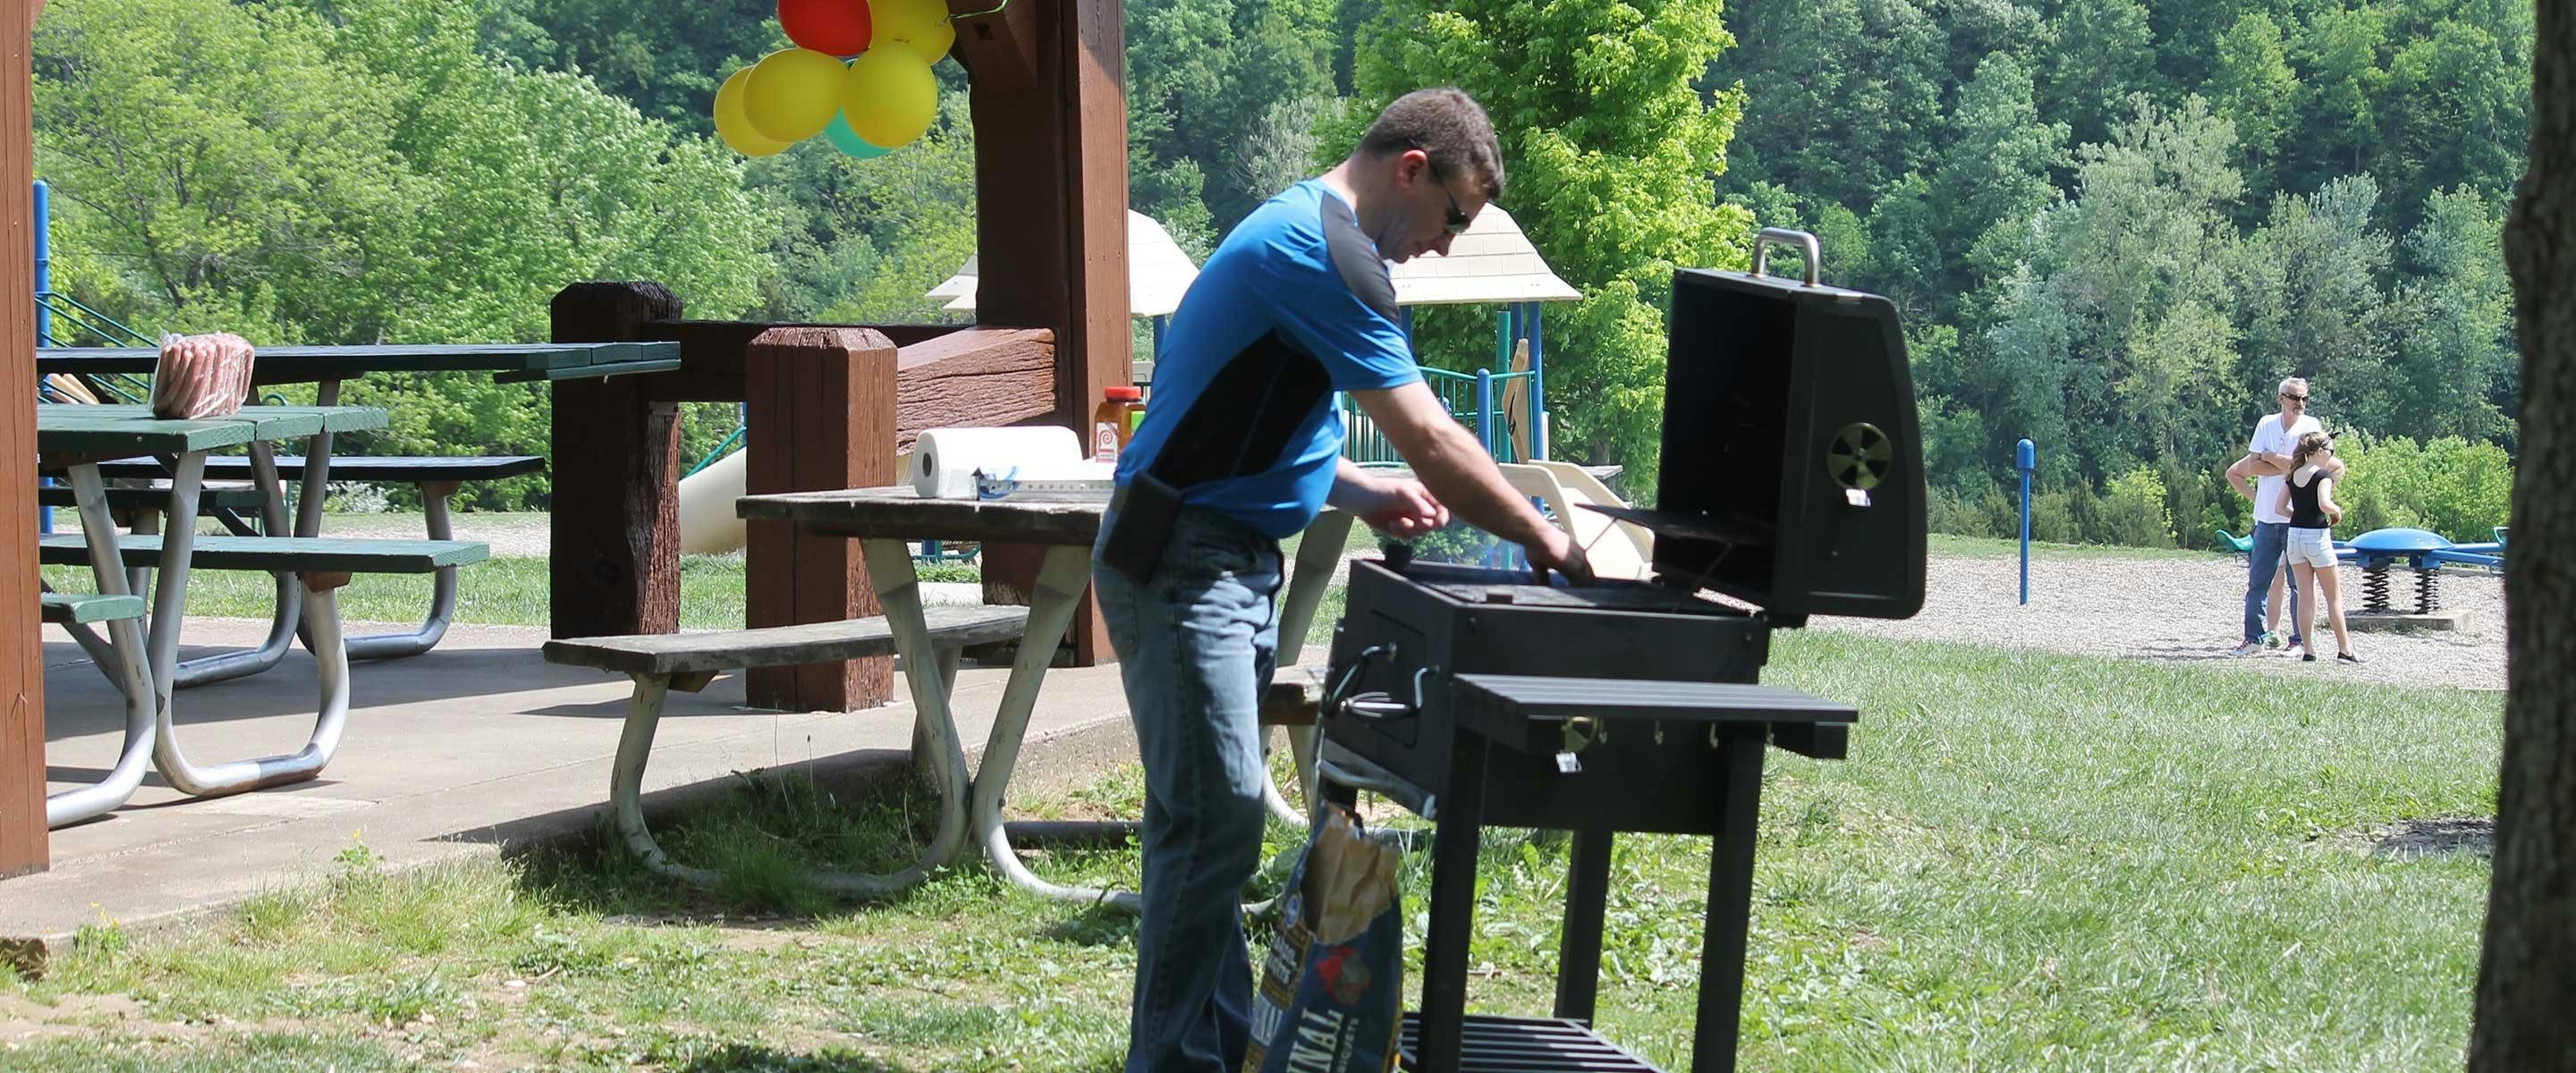 man preparing grill for meal